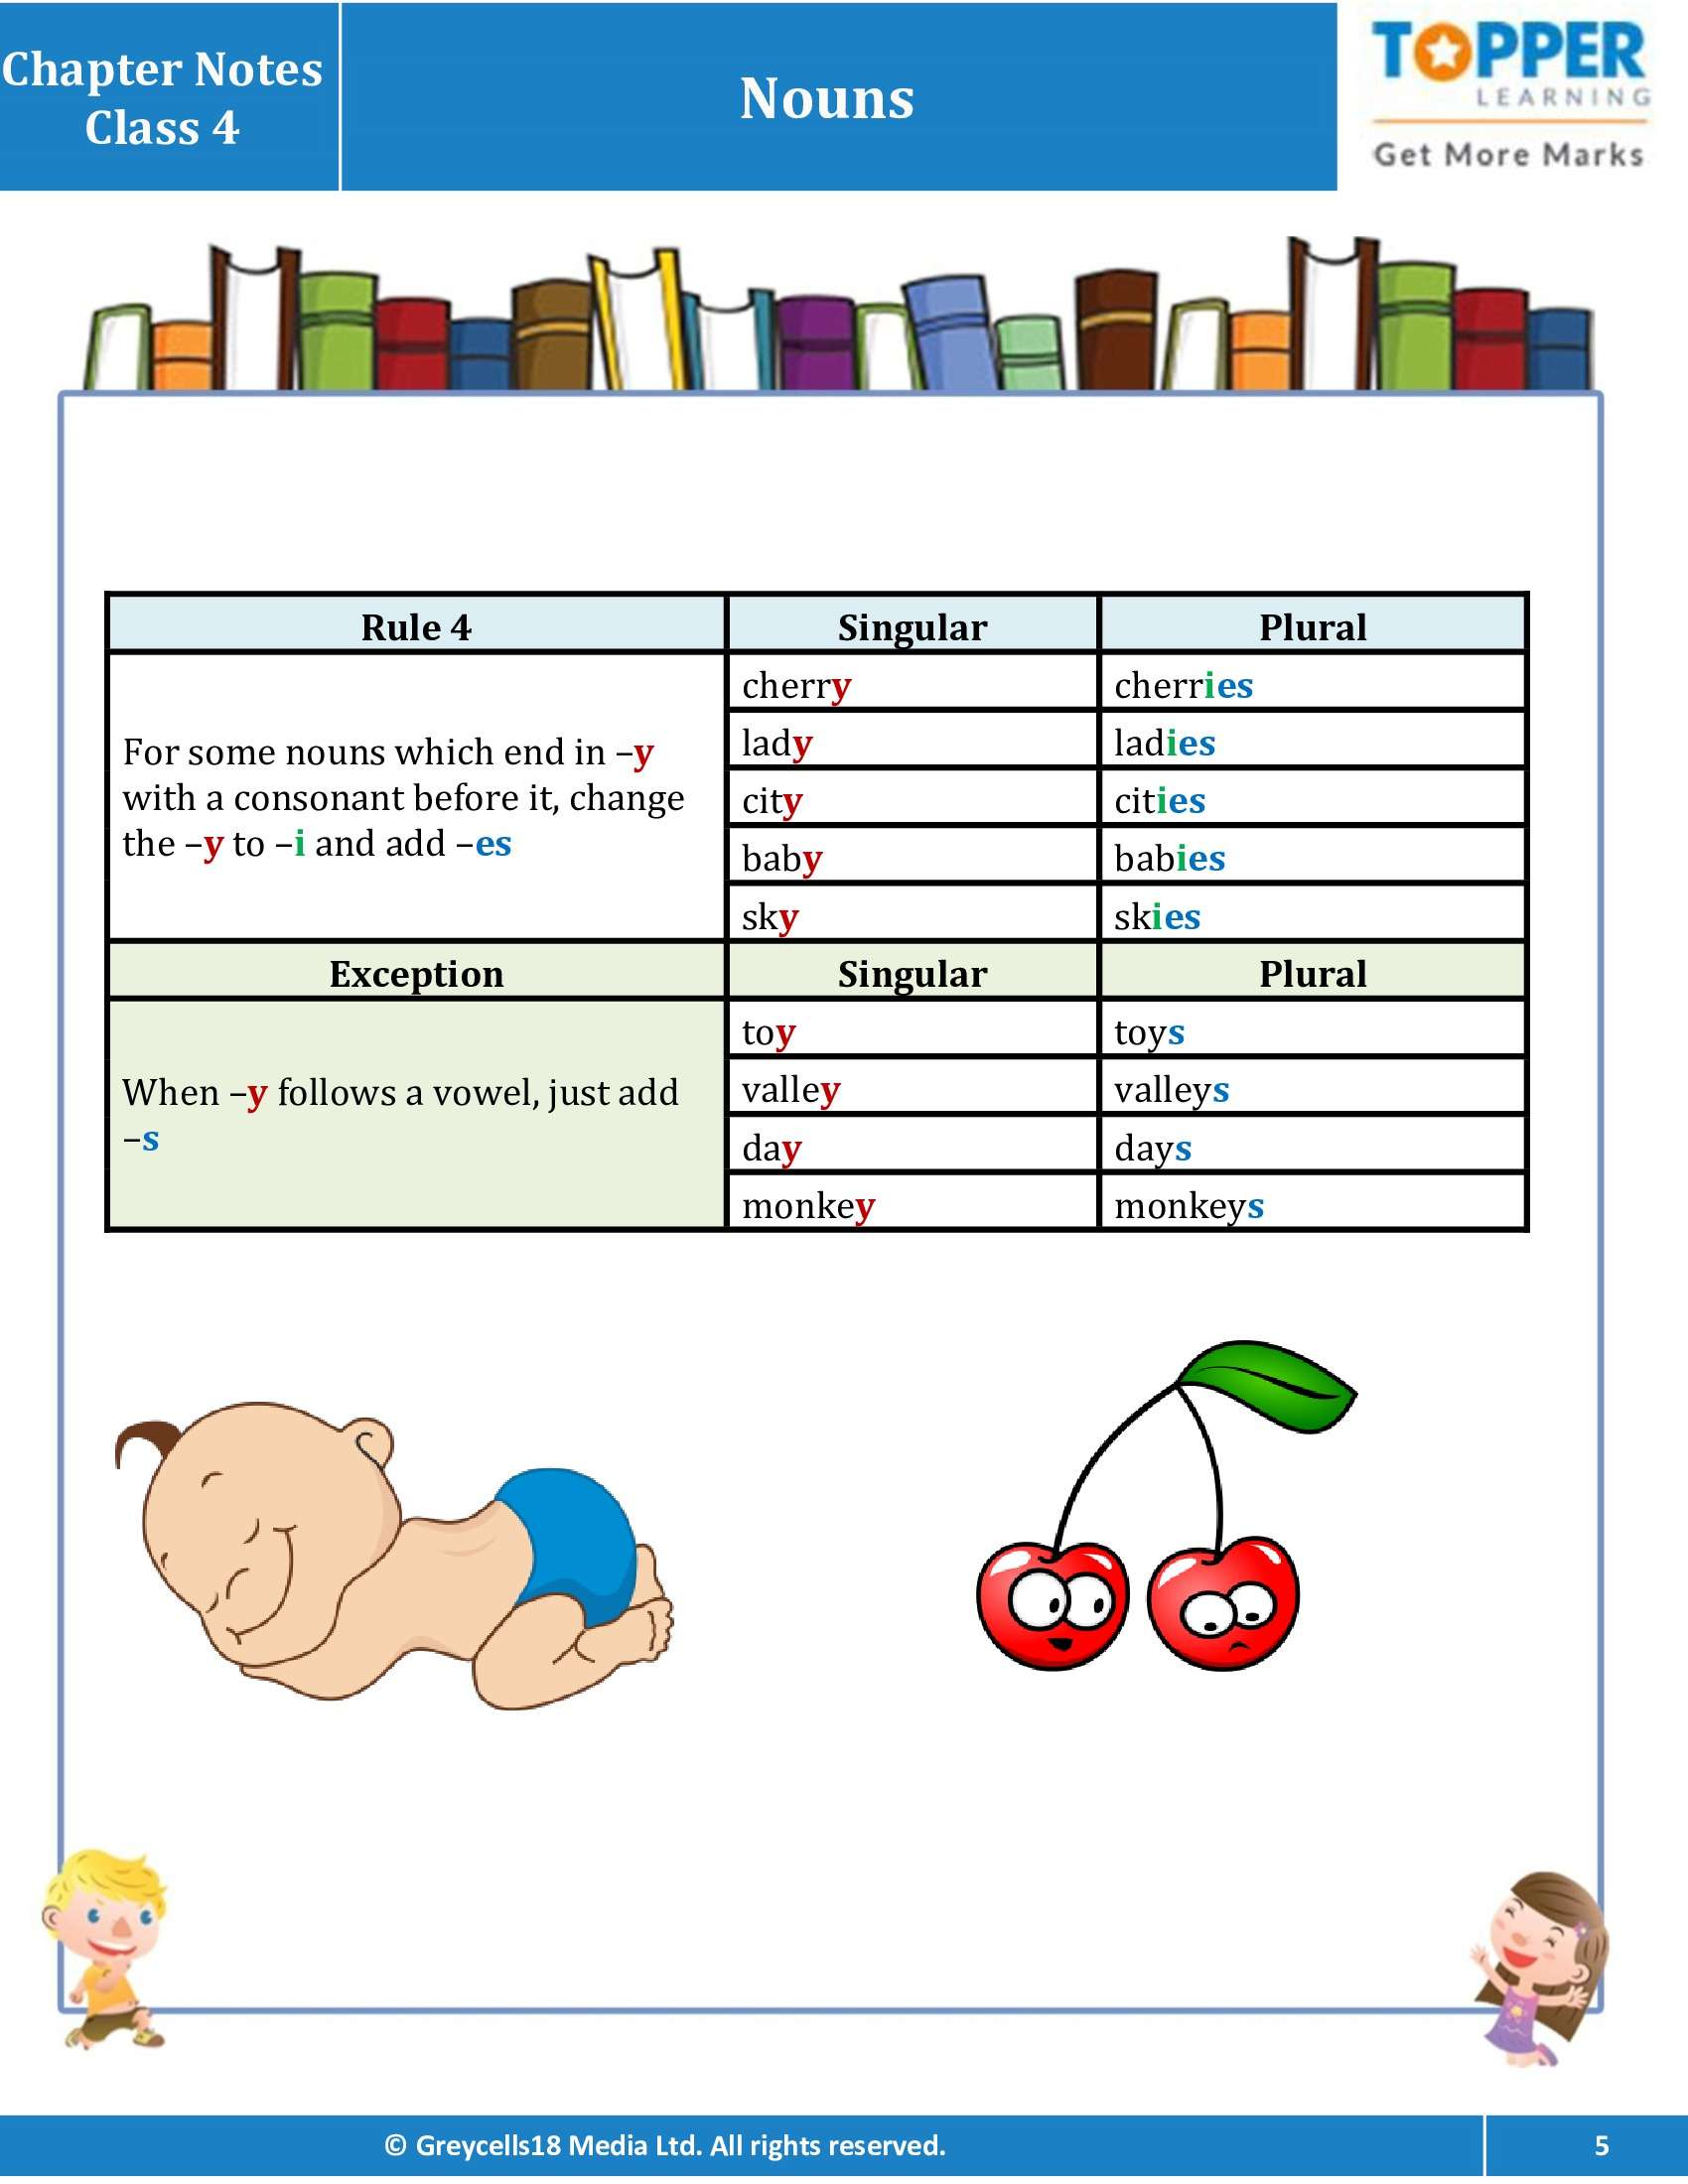 chapter-notes-for-class-4-junior-english-nouns-topperlearning